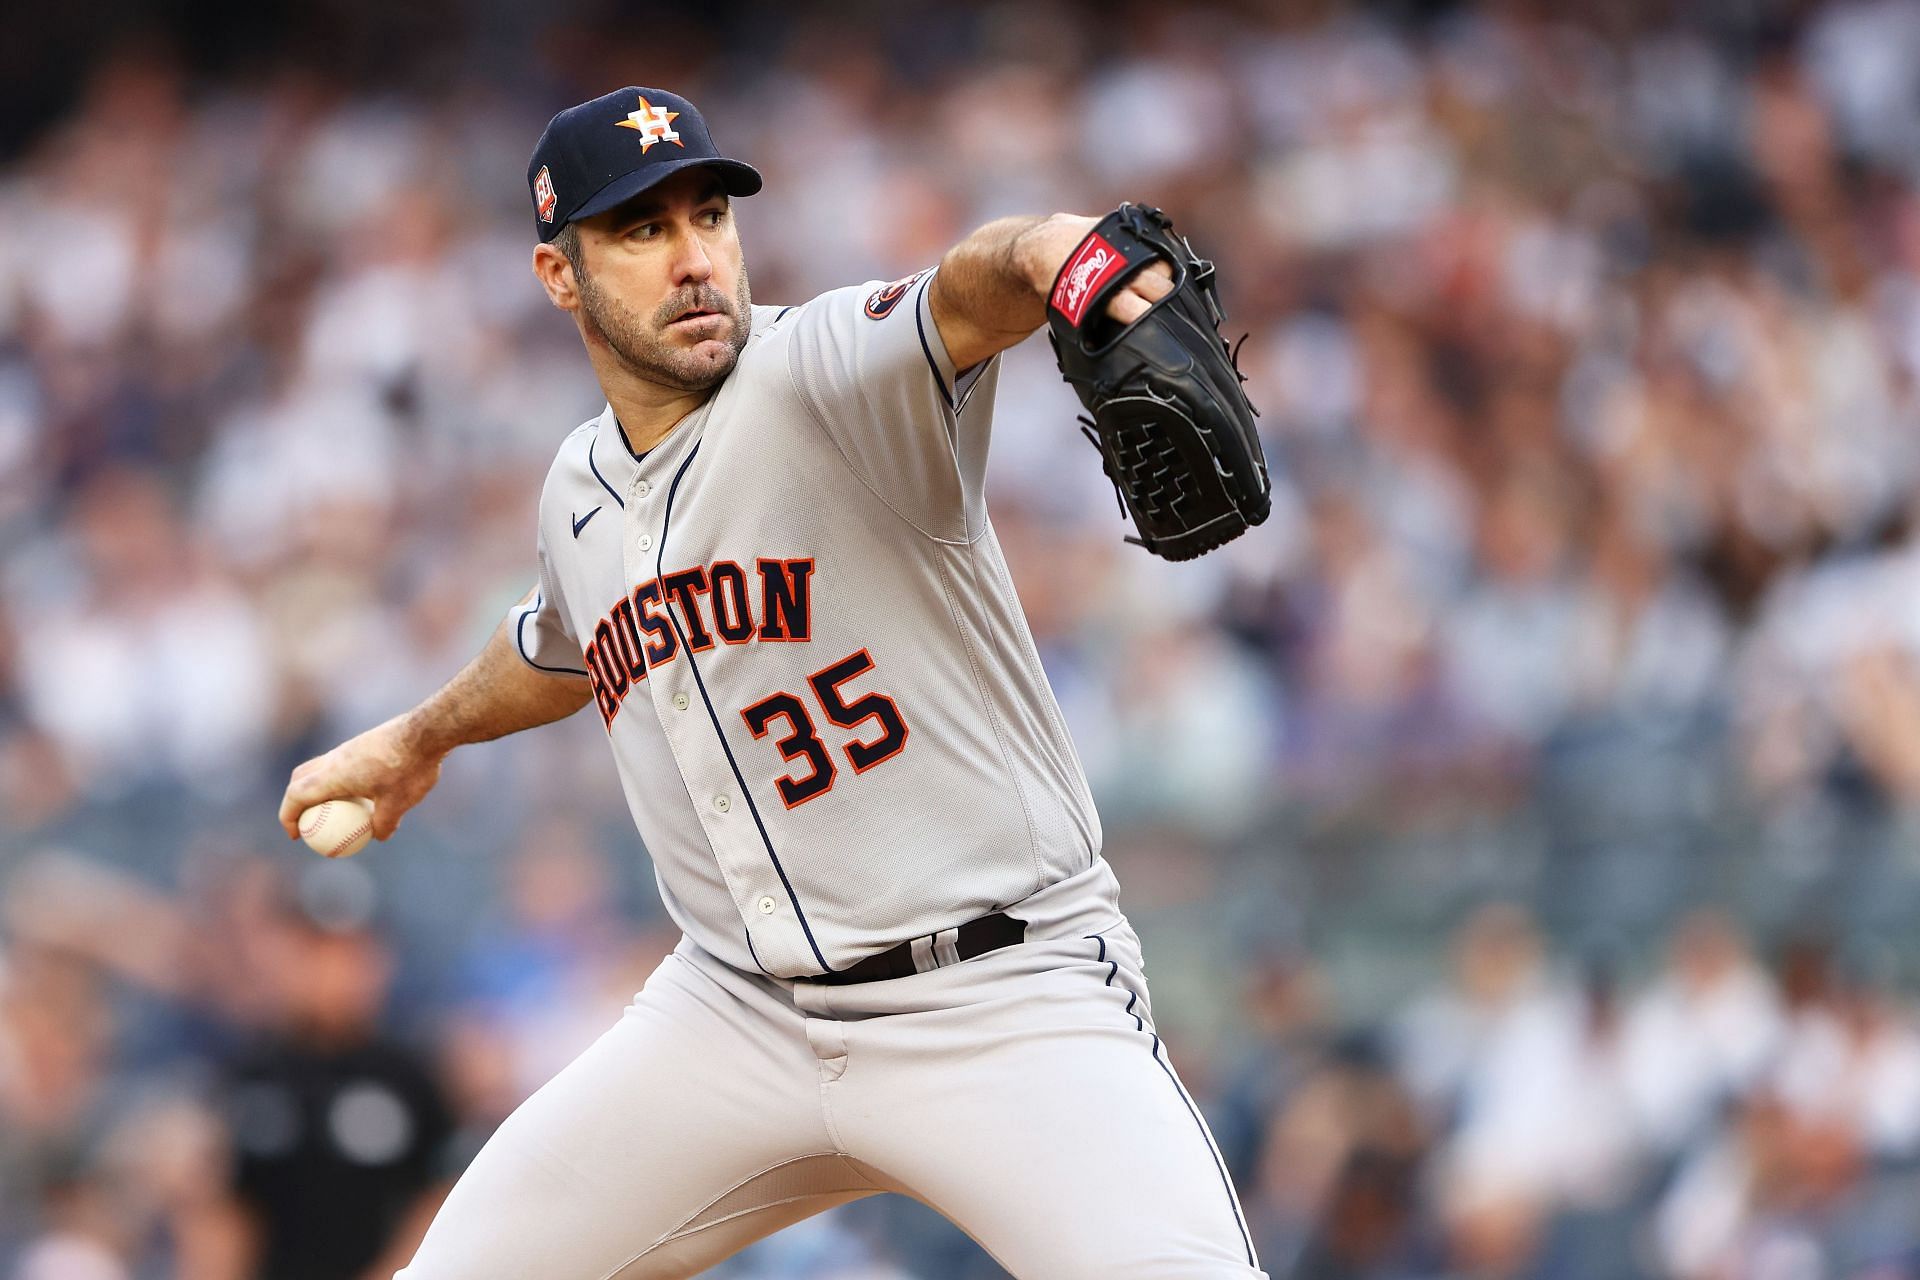 Verlander is third in the majors with a 0.83 WHIP.